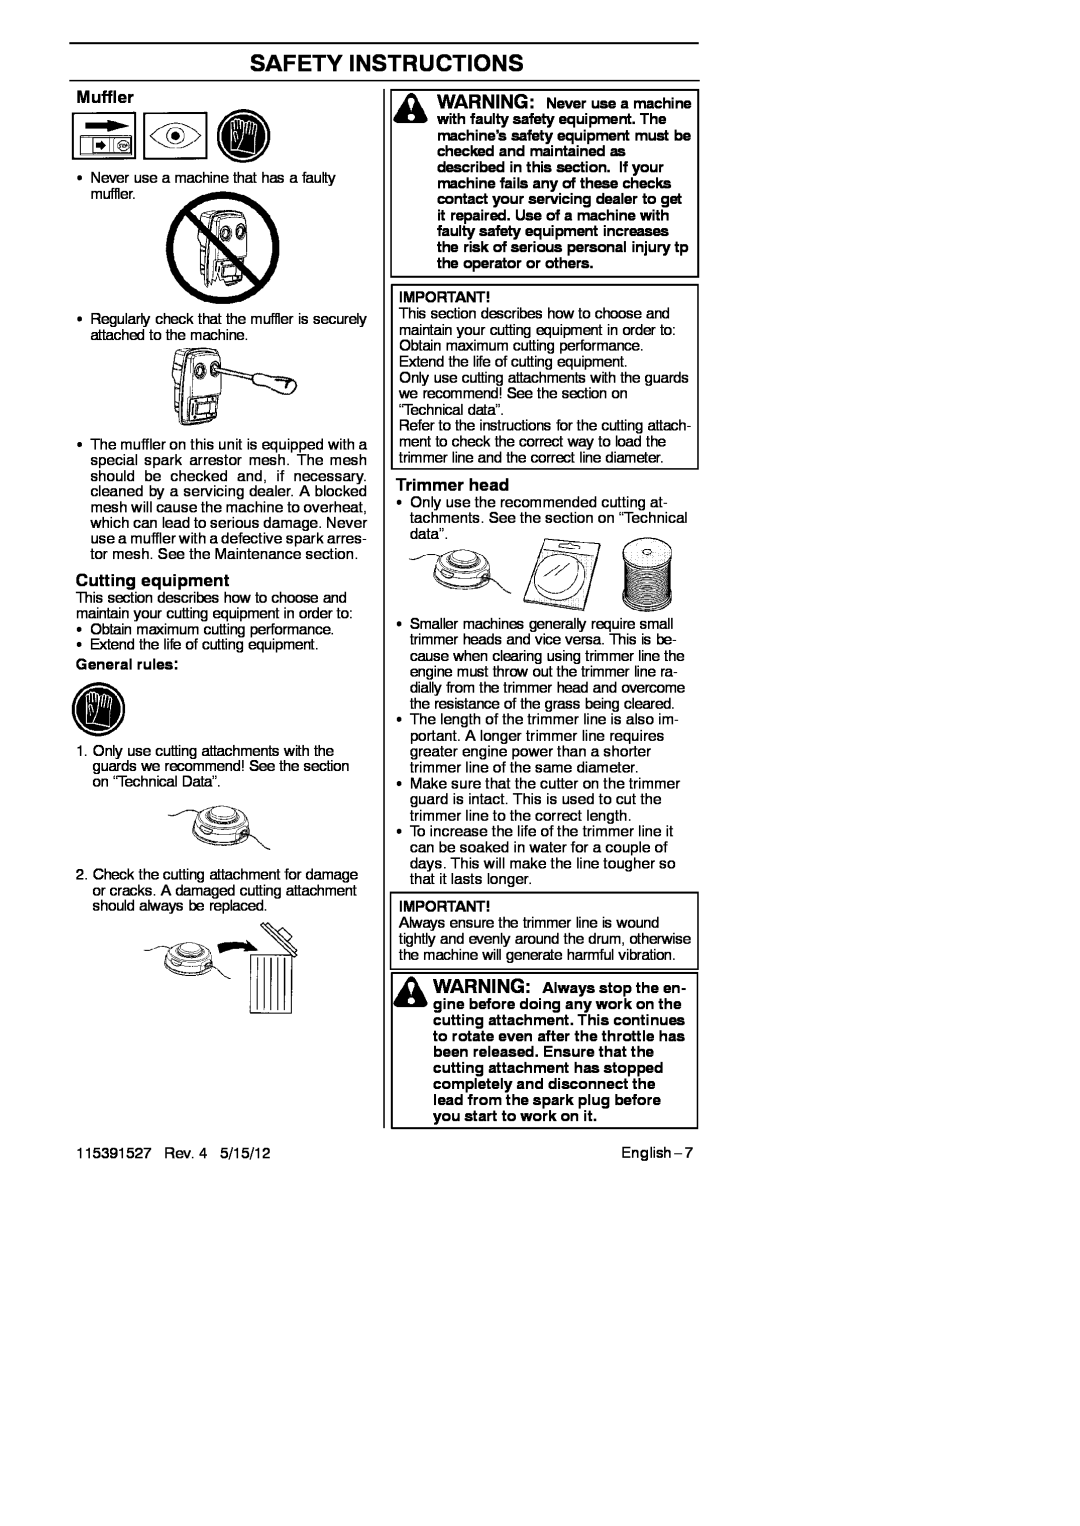 RedMax BC280 manual Trimmer head, Safety Instructions, Muffler, Cutting equipment, General rules 